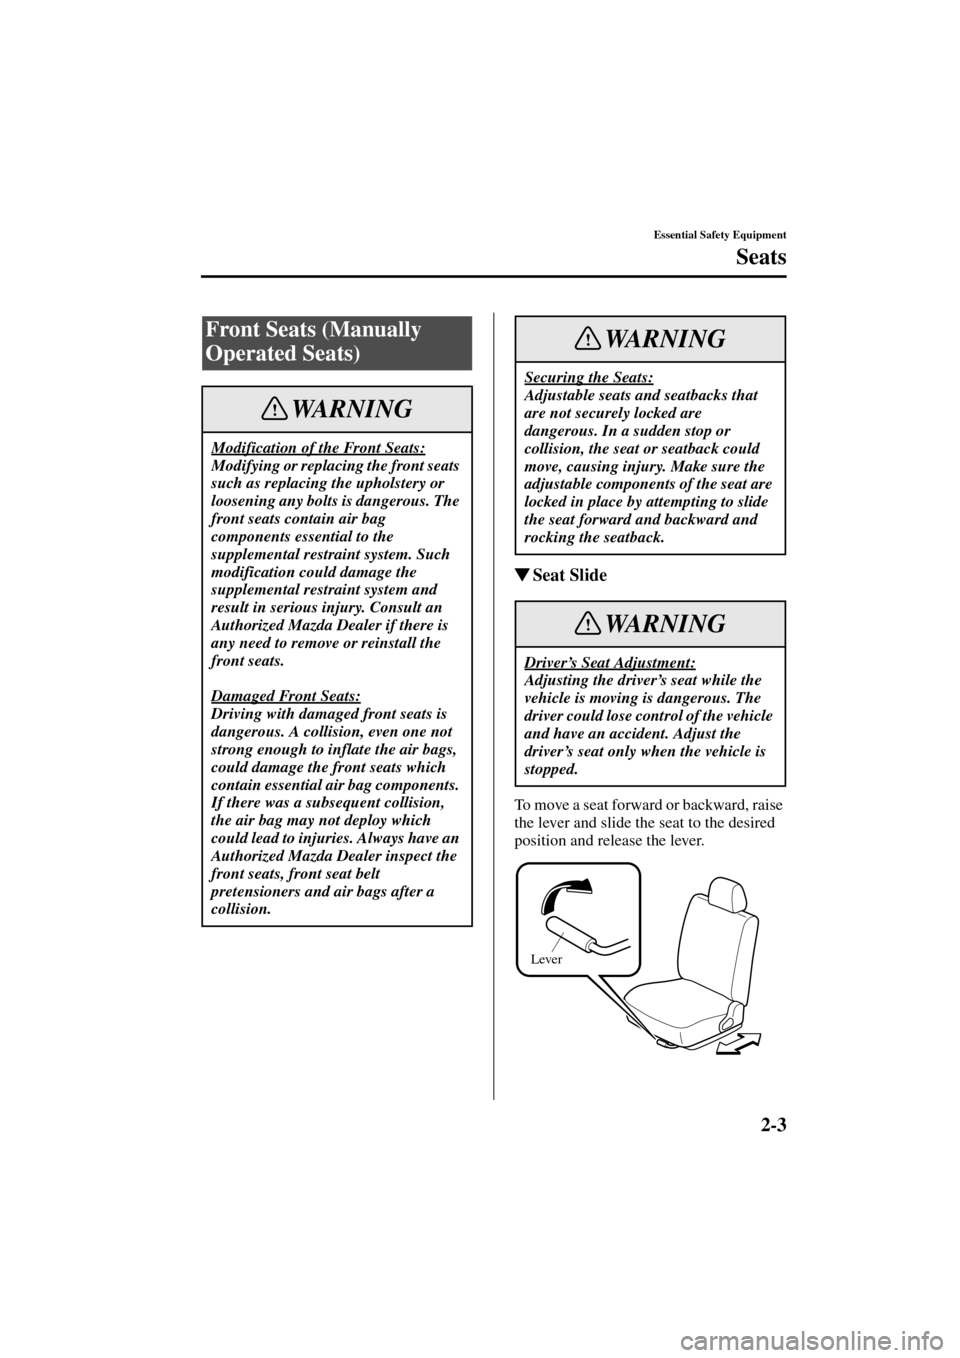 MAZDA MODEL MPV 2004  Owners Manual (in English) 2-3
Essential Safety Equipment
Seats
Form No. 8S06-EA-03H
Seat Slide
To move a seat forward or backward, raise 
the lever and slide the seat to the desired 
position and release the lever.
Front Seat